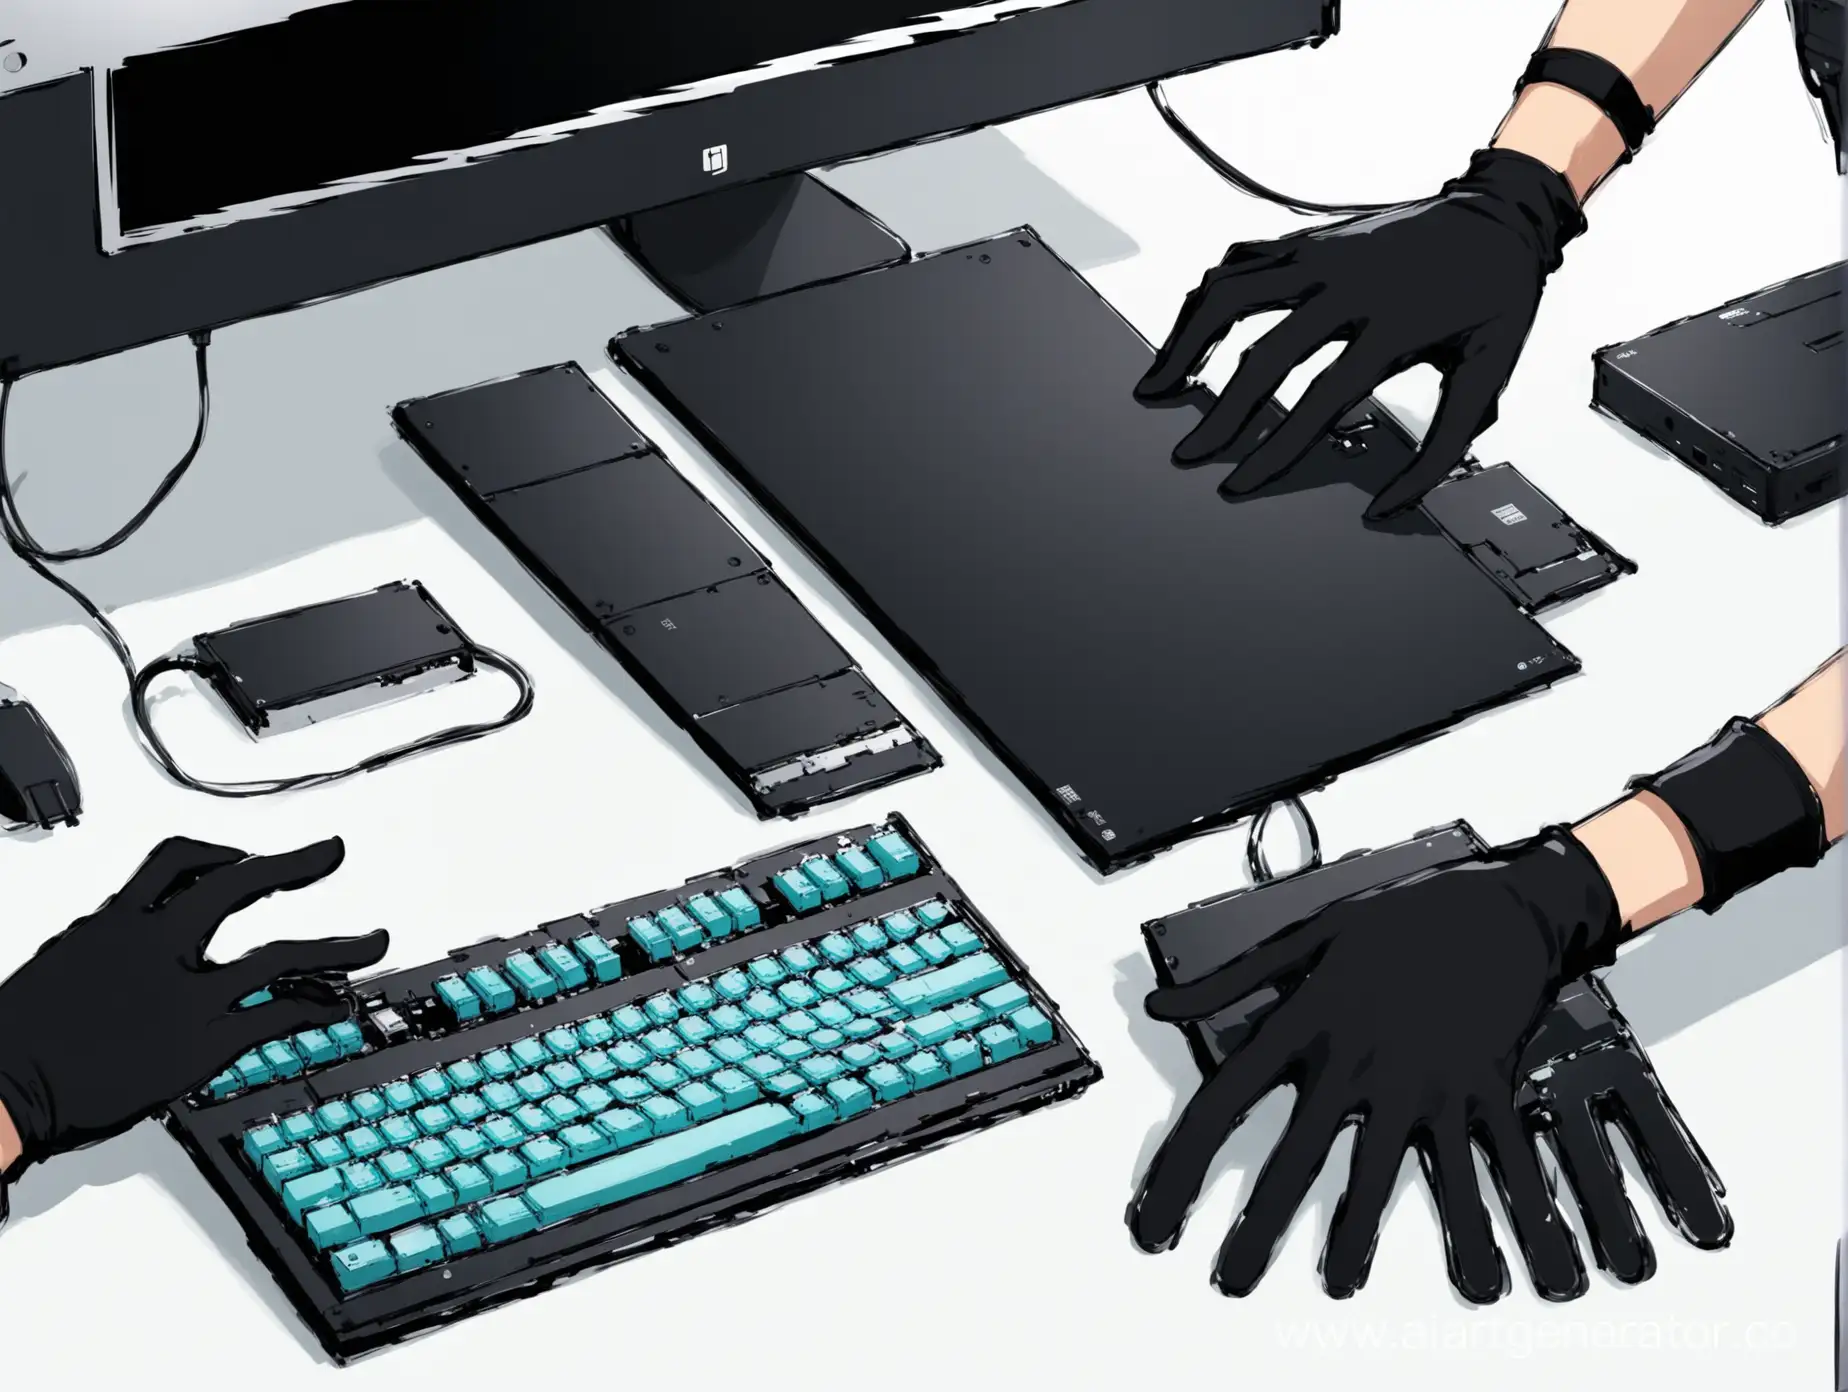 Gloved hands assemble a personal computer